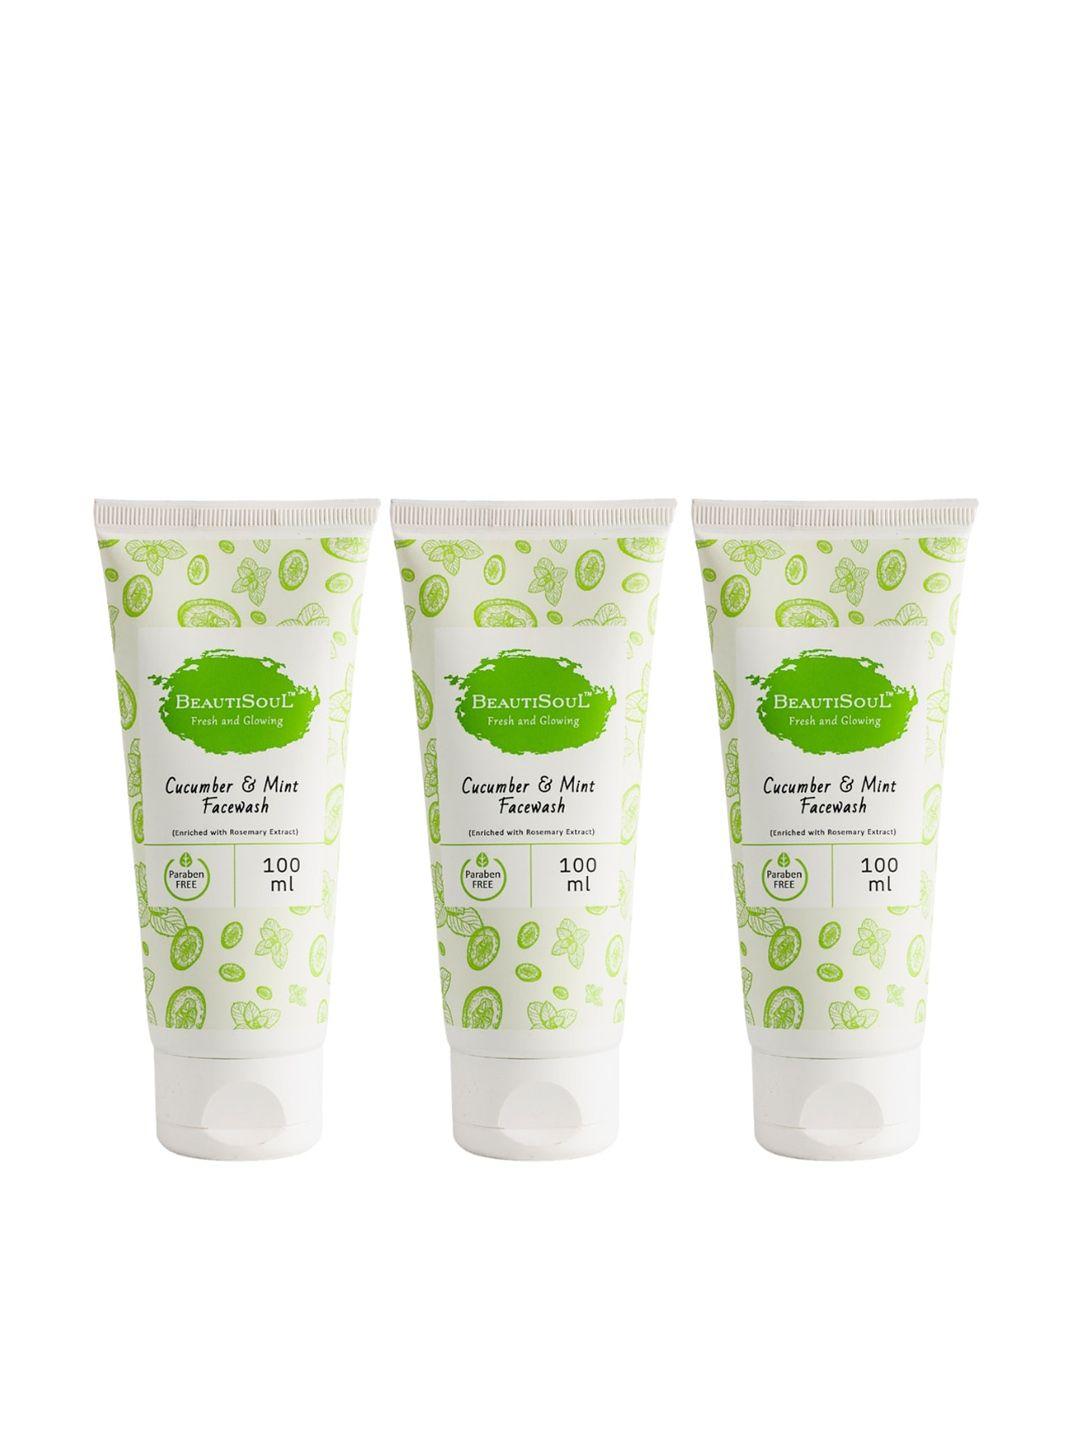 beautisoul pack of 3 cucumber and mint face wash -100ml each